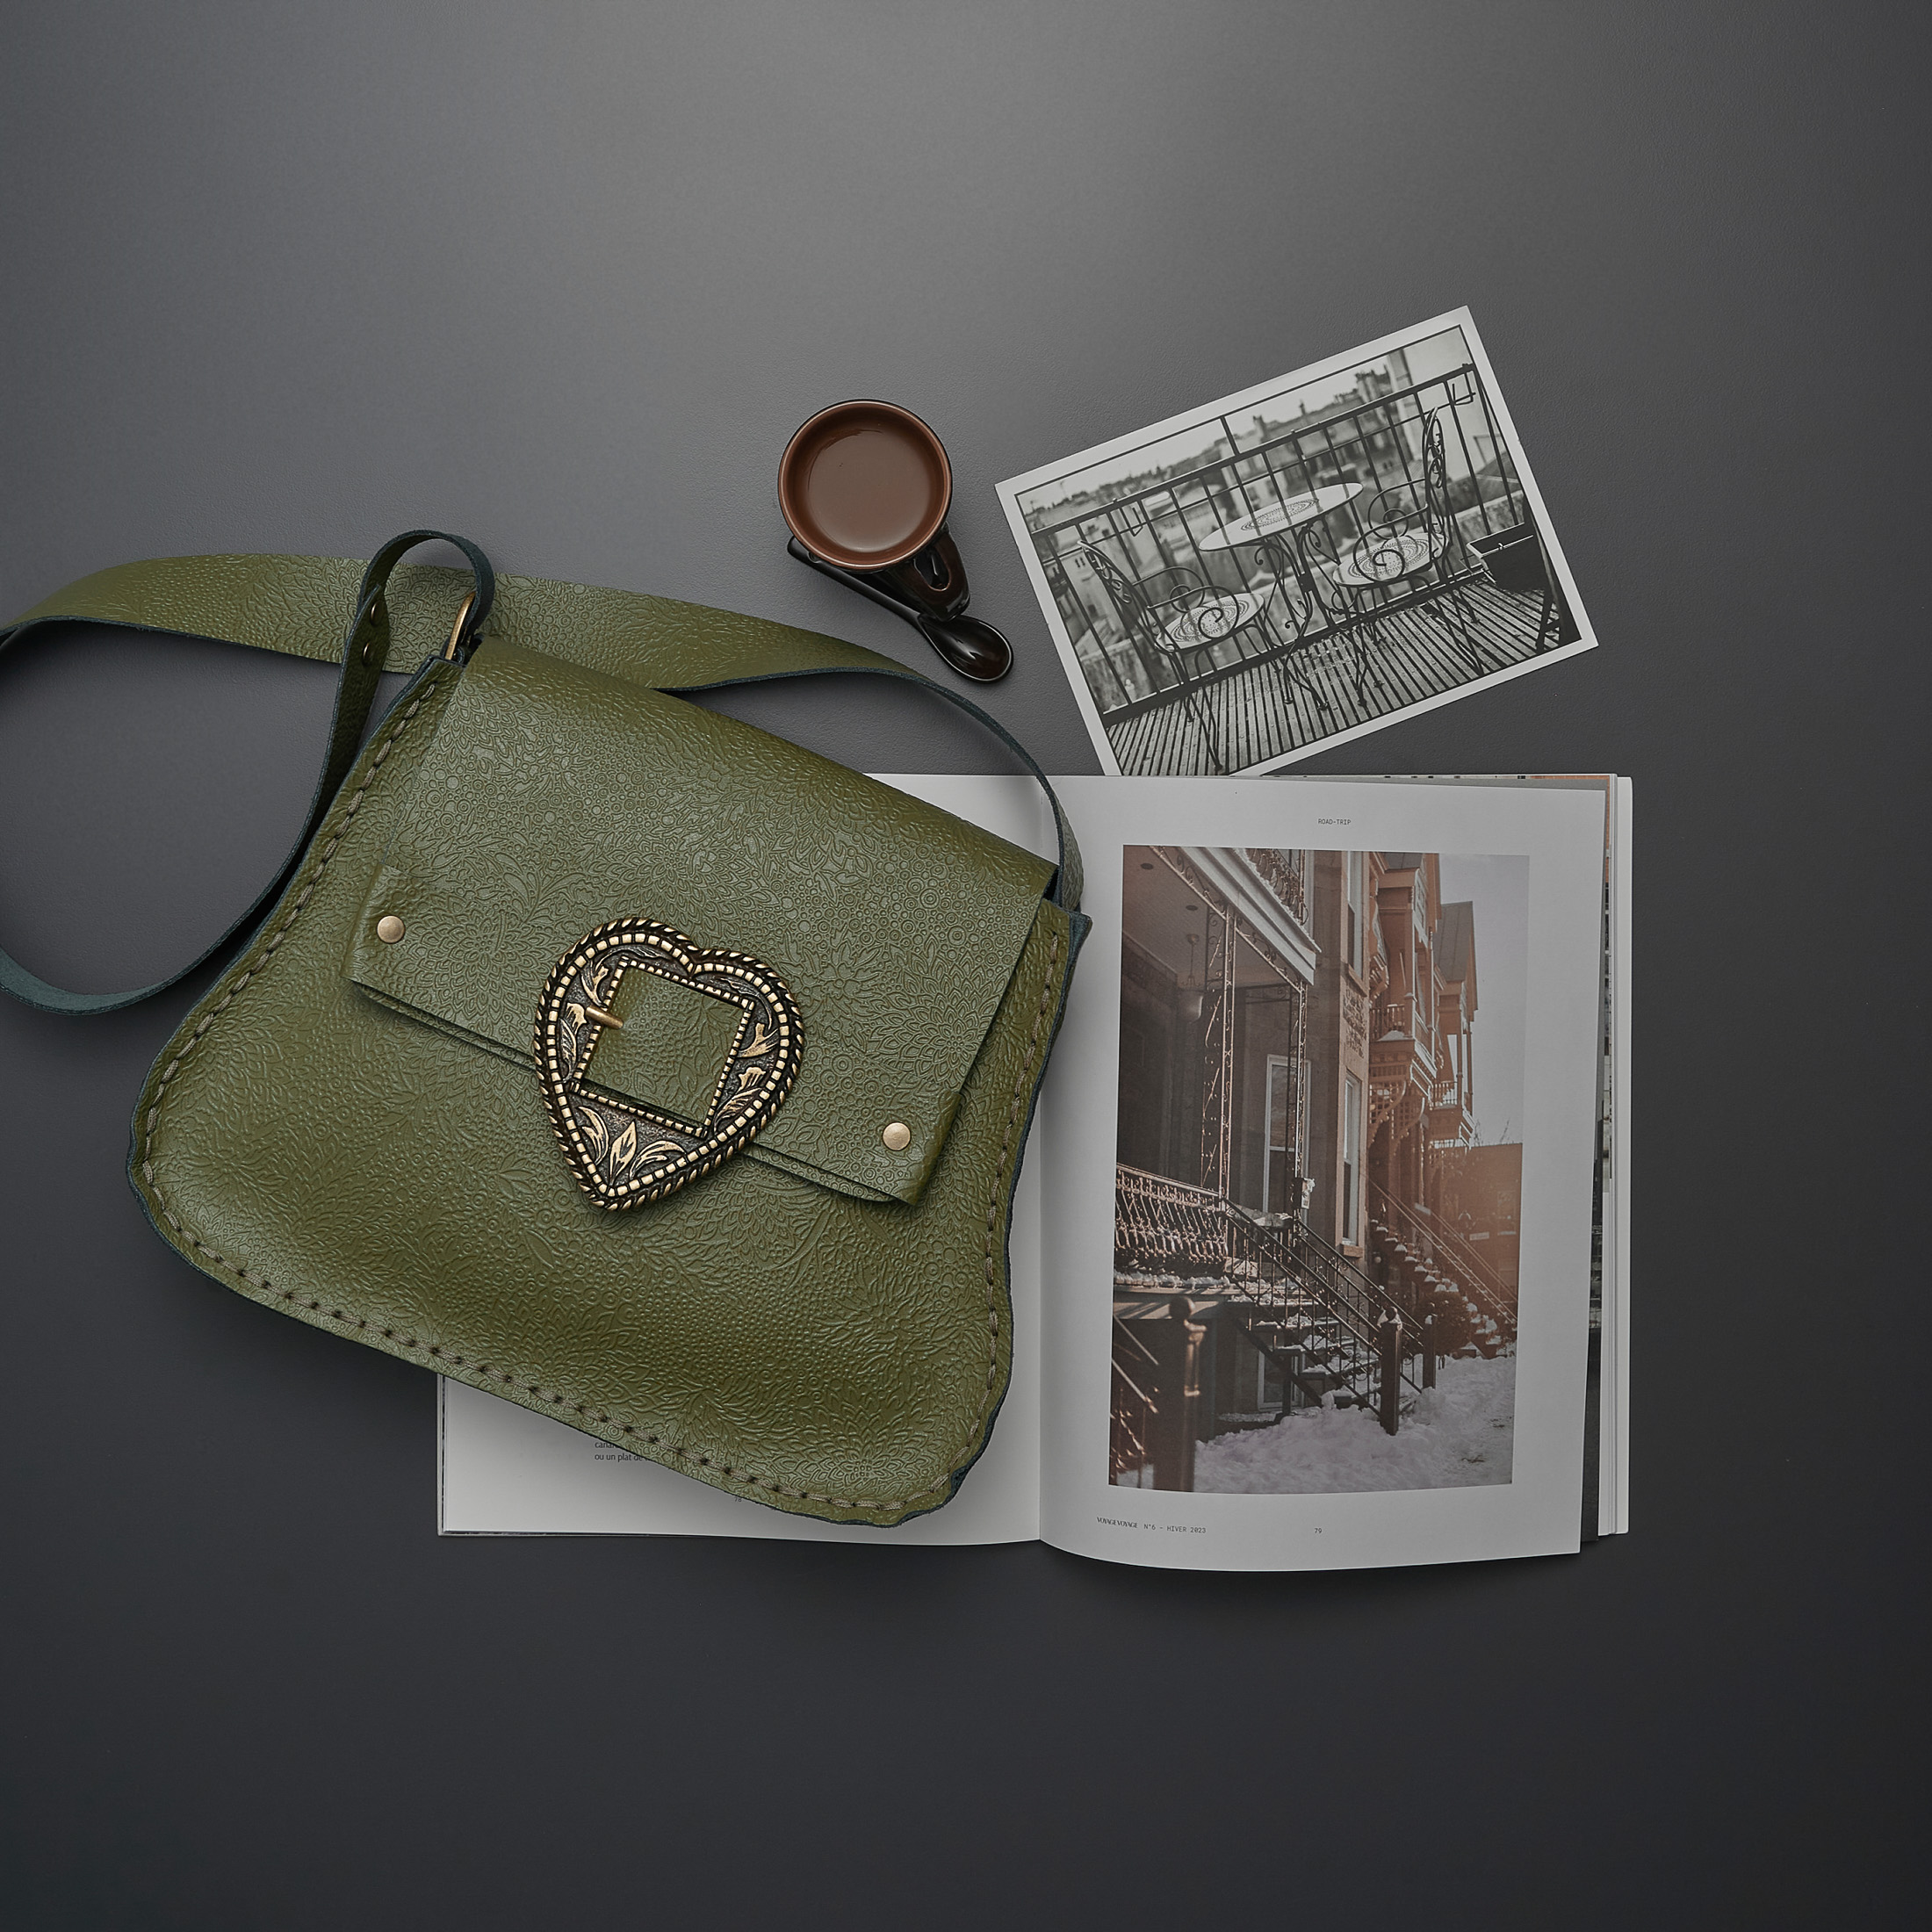 Individual Artleather The Power of Love olive bag